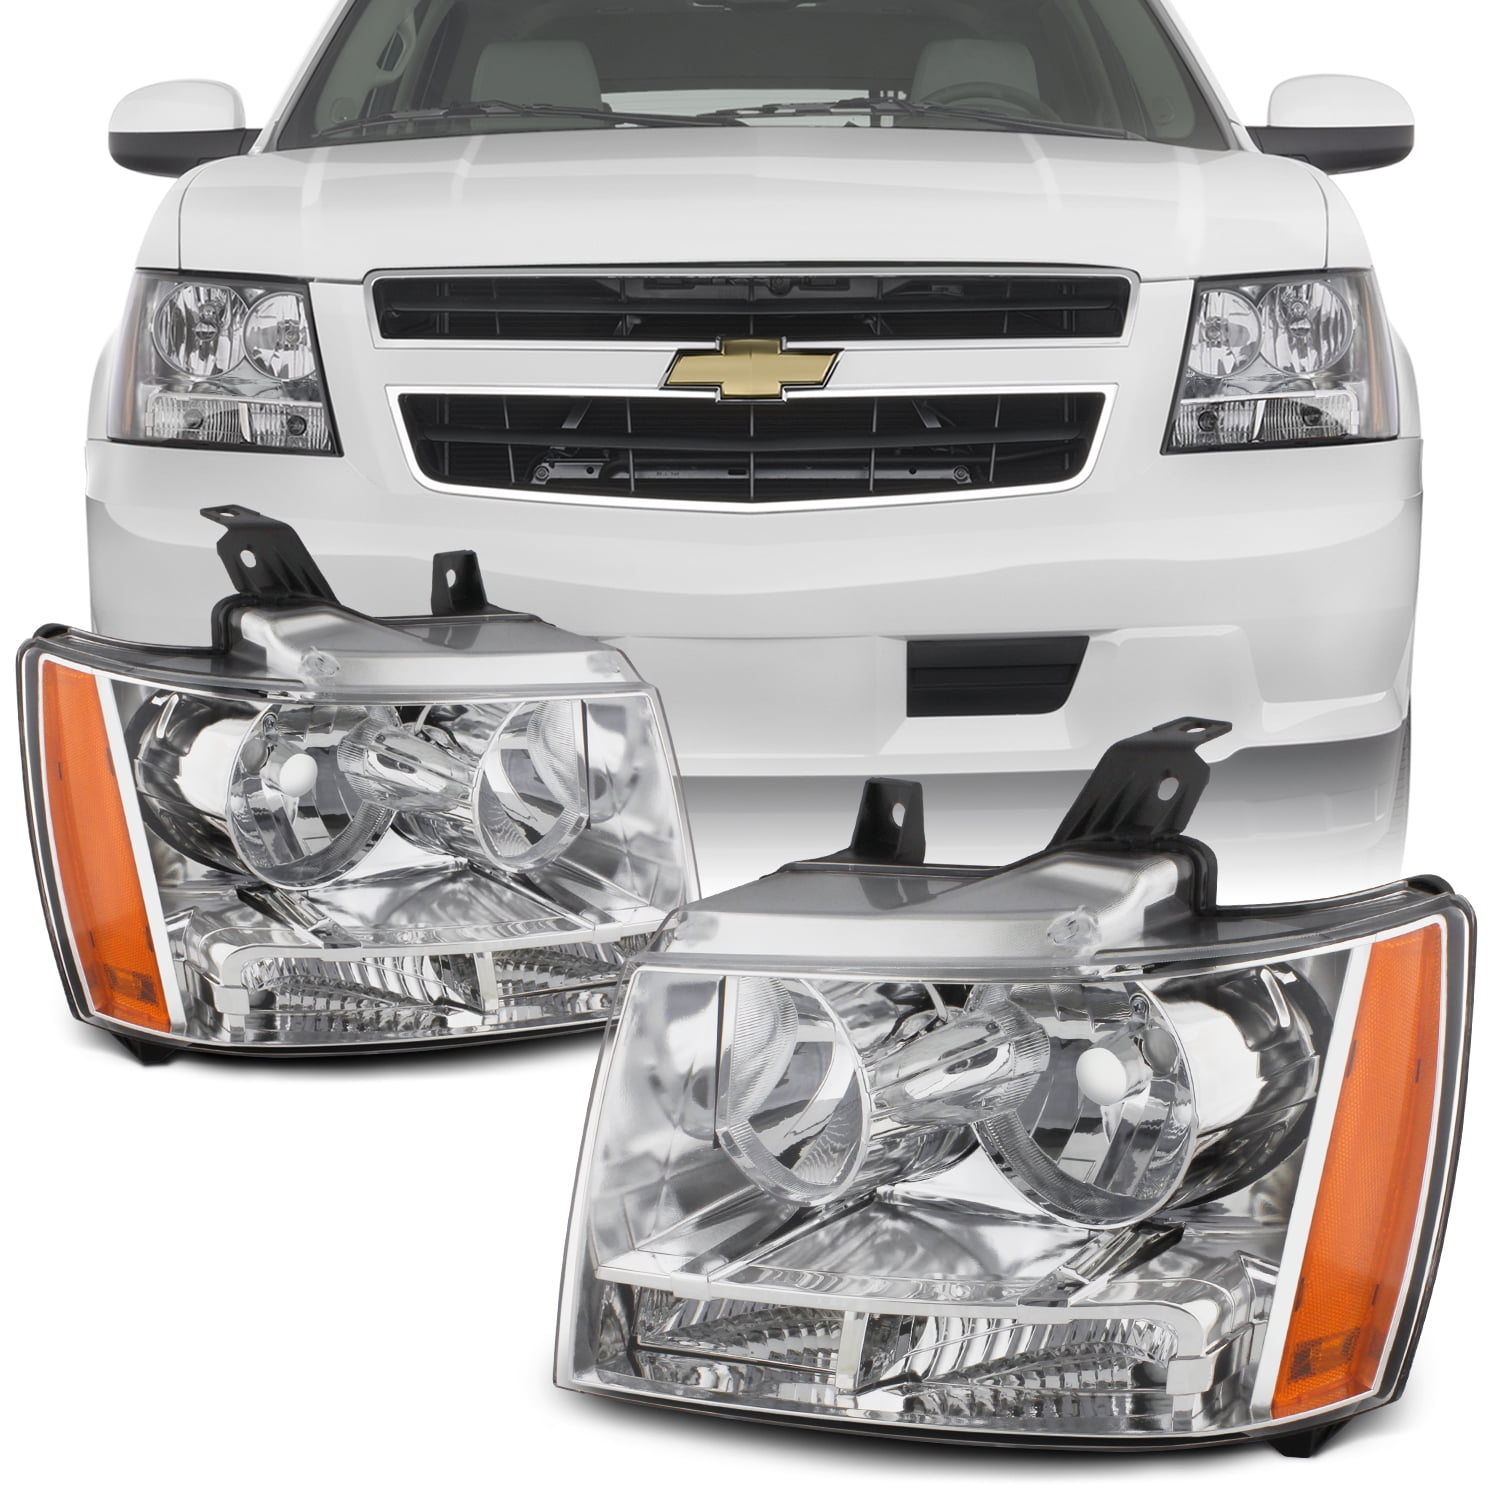 For Smoked Smoke 07-13 Suburban Tahoe Avalanche Headlights Front Lamps Direct Replacement Left Right 